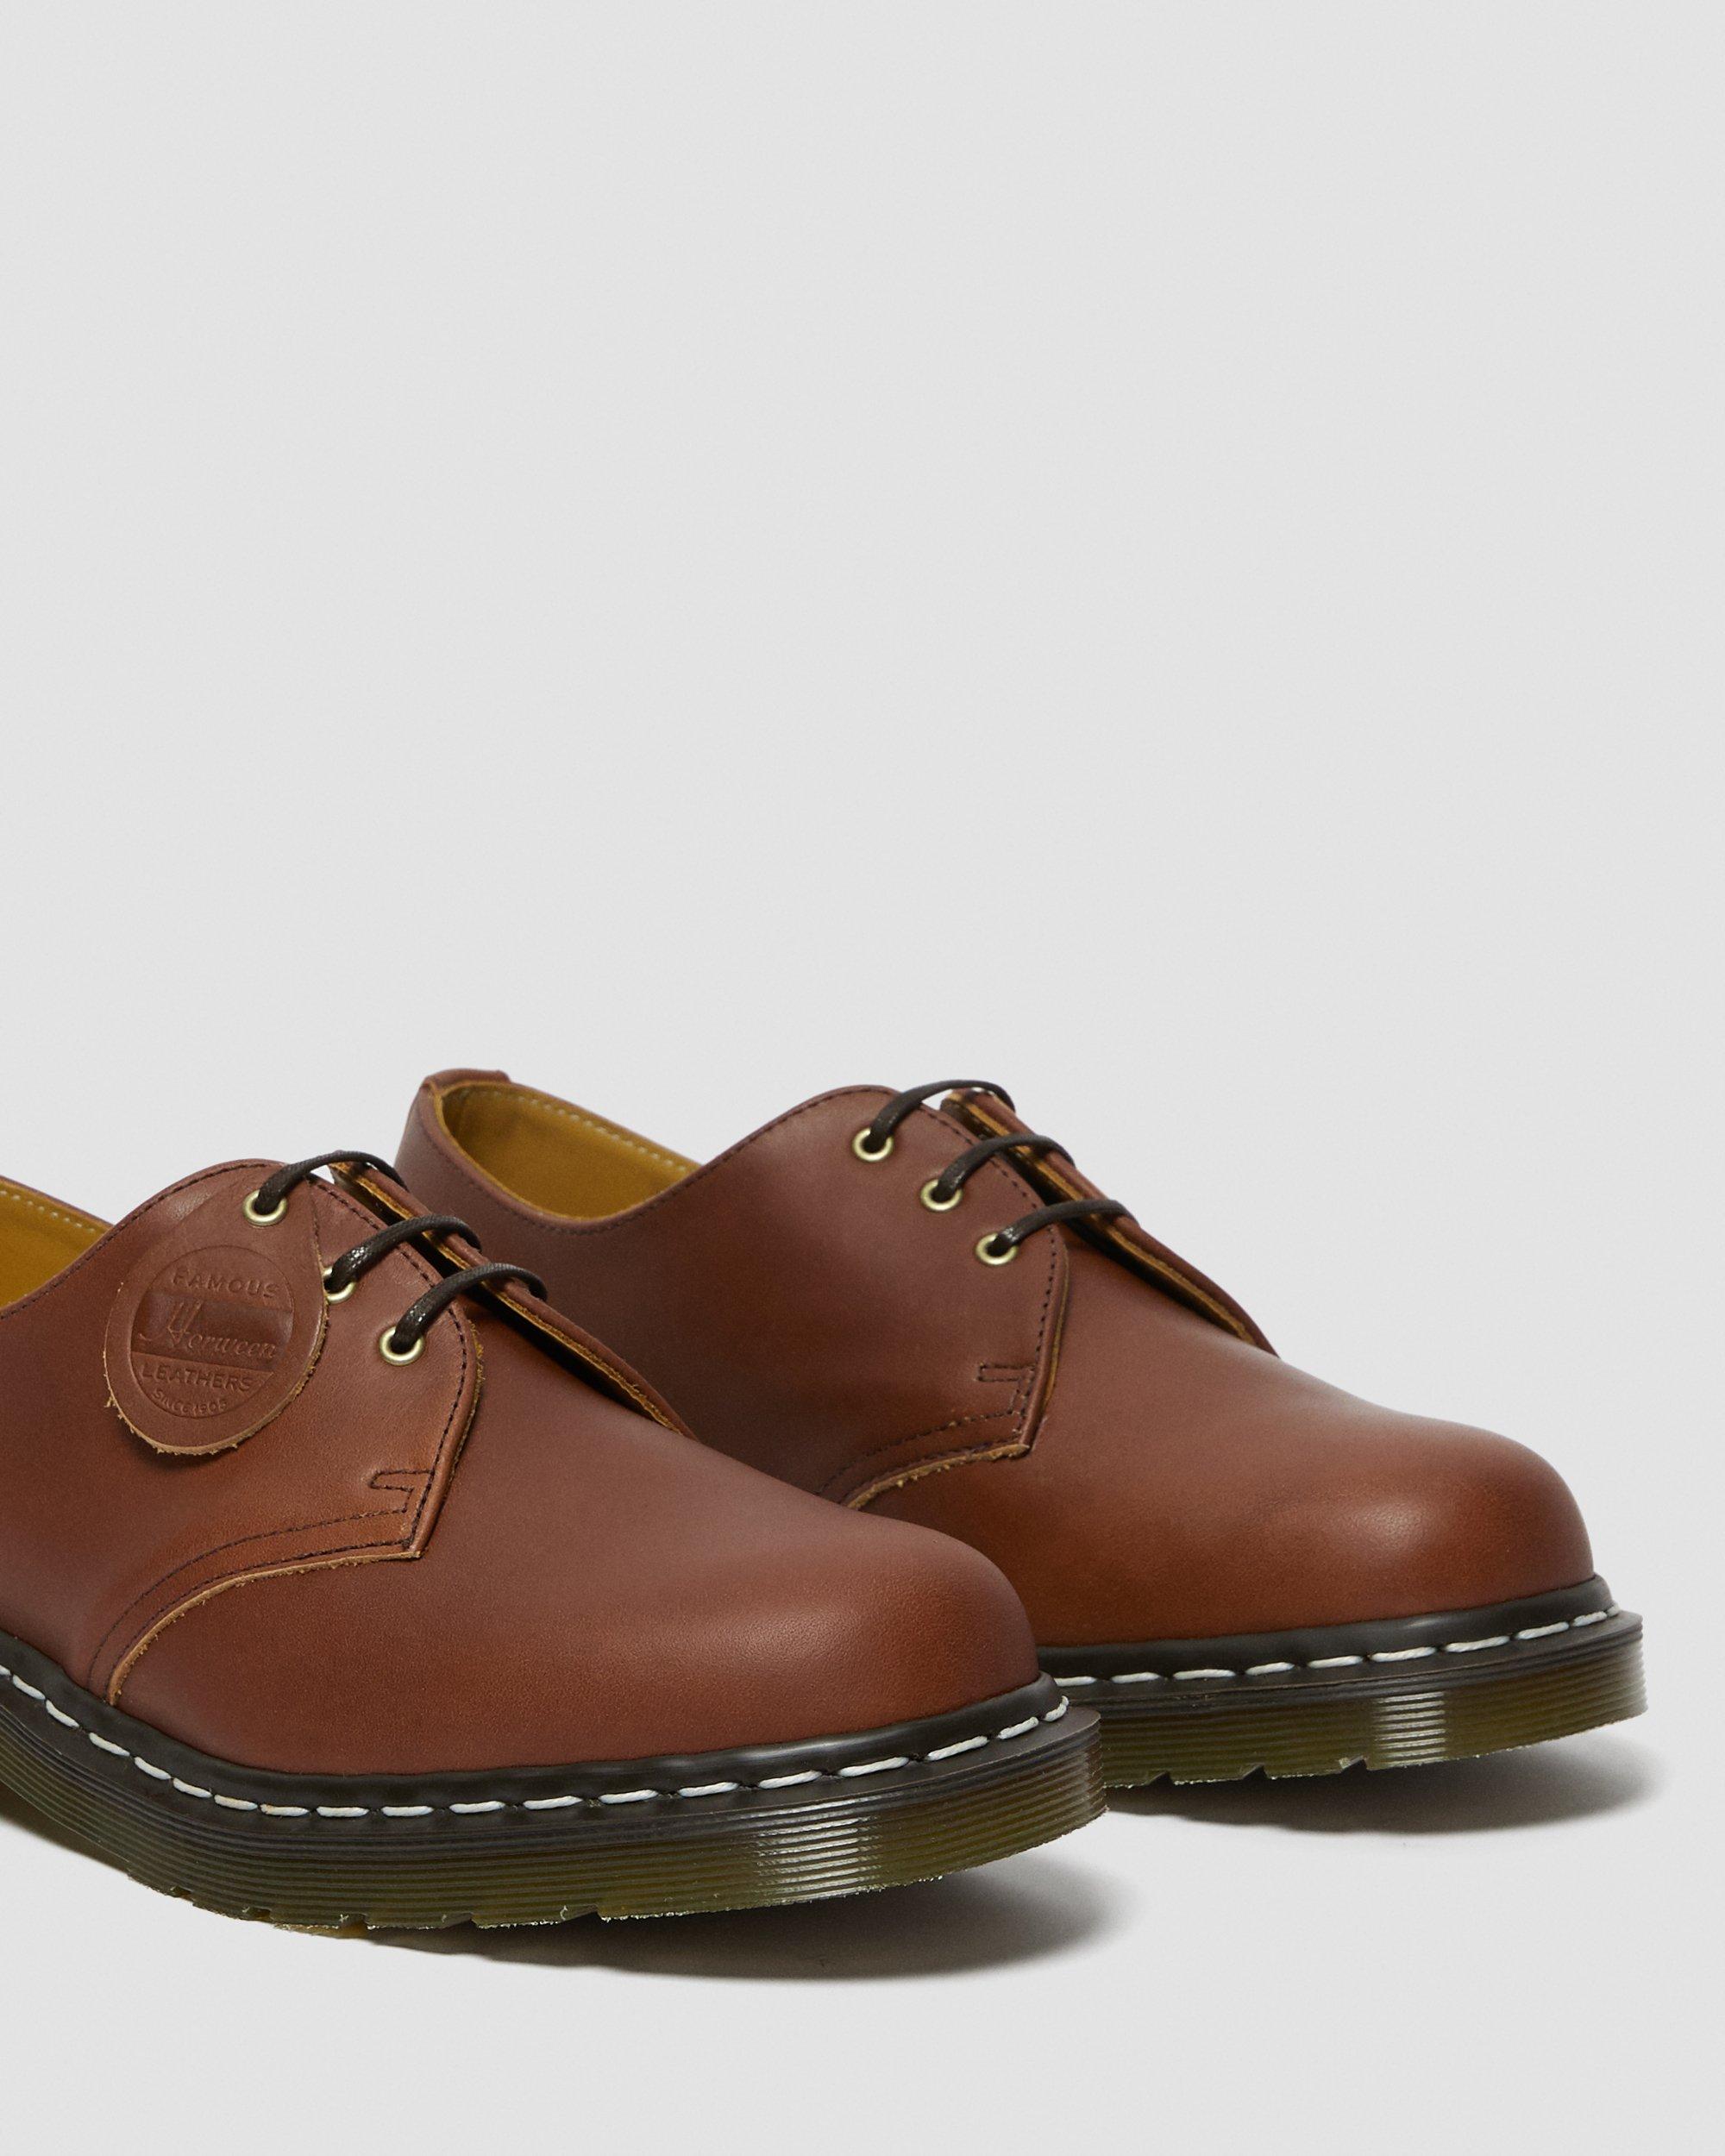 1461 VEG TAN LEATHER SHOES in Tan | Dr. Martens